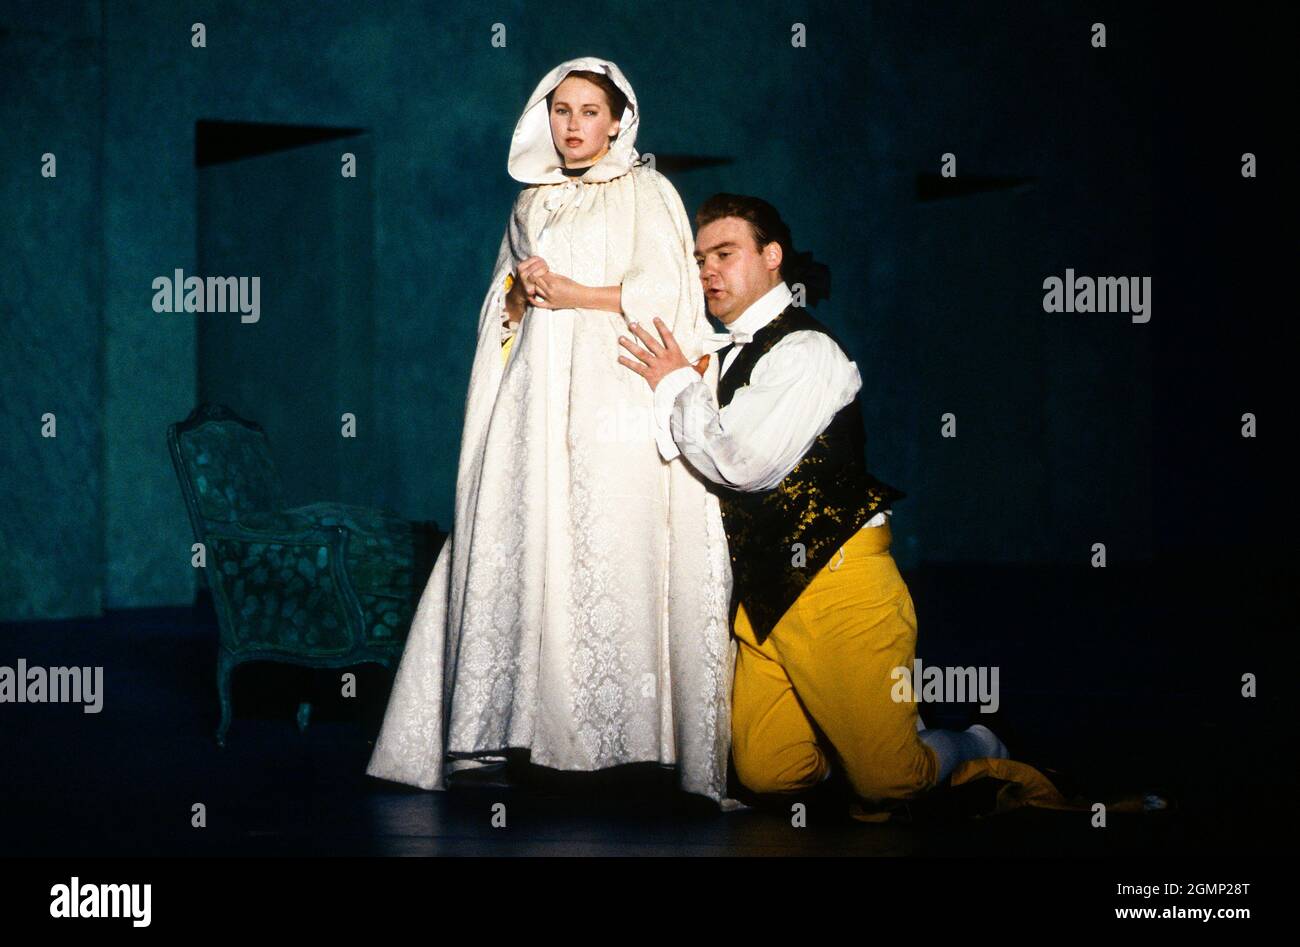 Act 4 - 'invisible' in the 'dark' -begging forgiveness: Bryn Terfel (Figaro), Cathryn Pope (Susanna - disguised as the Countess)  in FIGARO’S WEDDING at English National Opera (ENO), London Coliseum, London WC2  30/10/1991 music: Wolfgang Amadeus Mozart  libretto: Lorenzo Da Ponte  conductor: Paul Daniel  design: Richard Hudson  lighting: Nick Chelton  choreographer: Ron Howell  director: Graham Vick Stock Photo